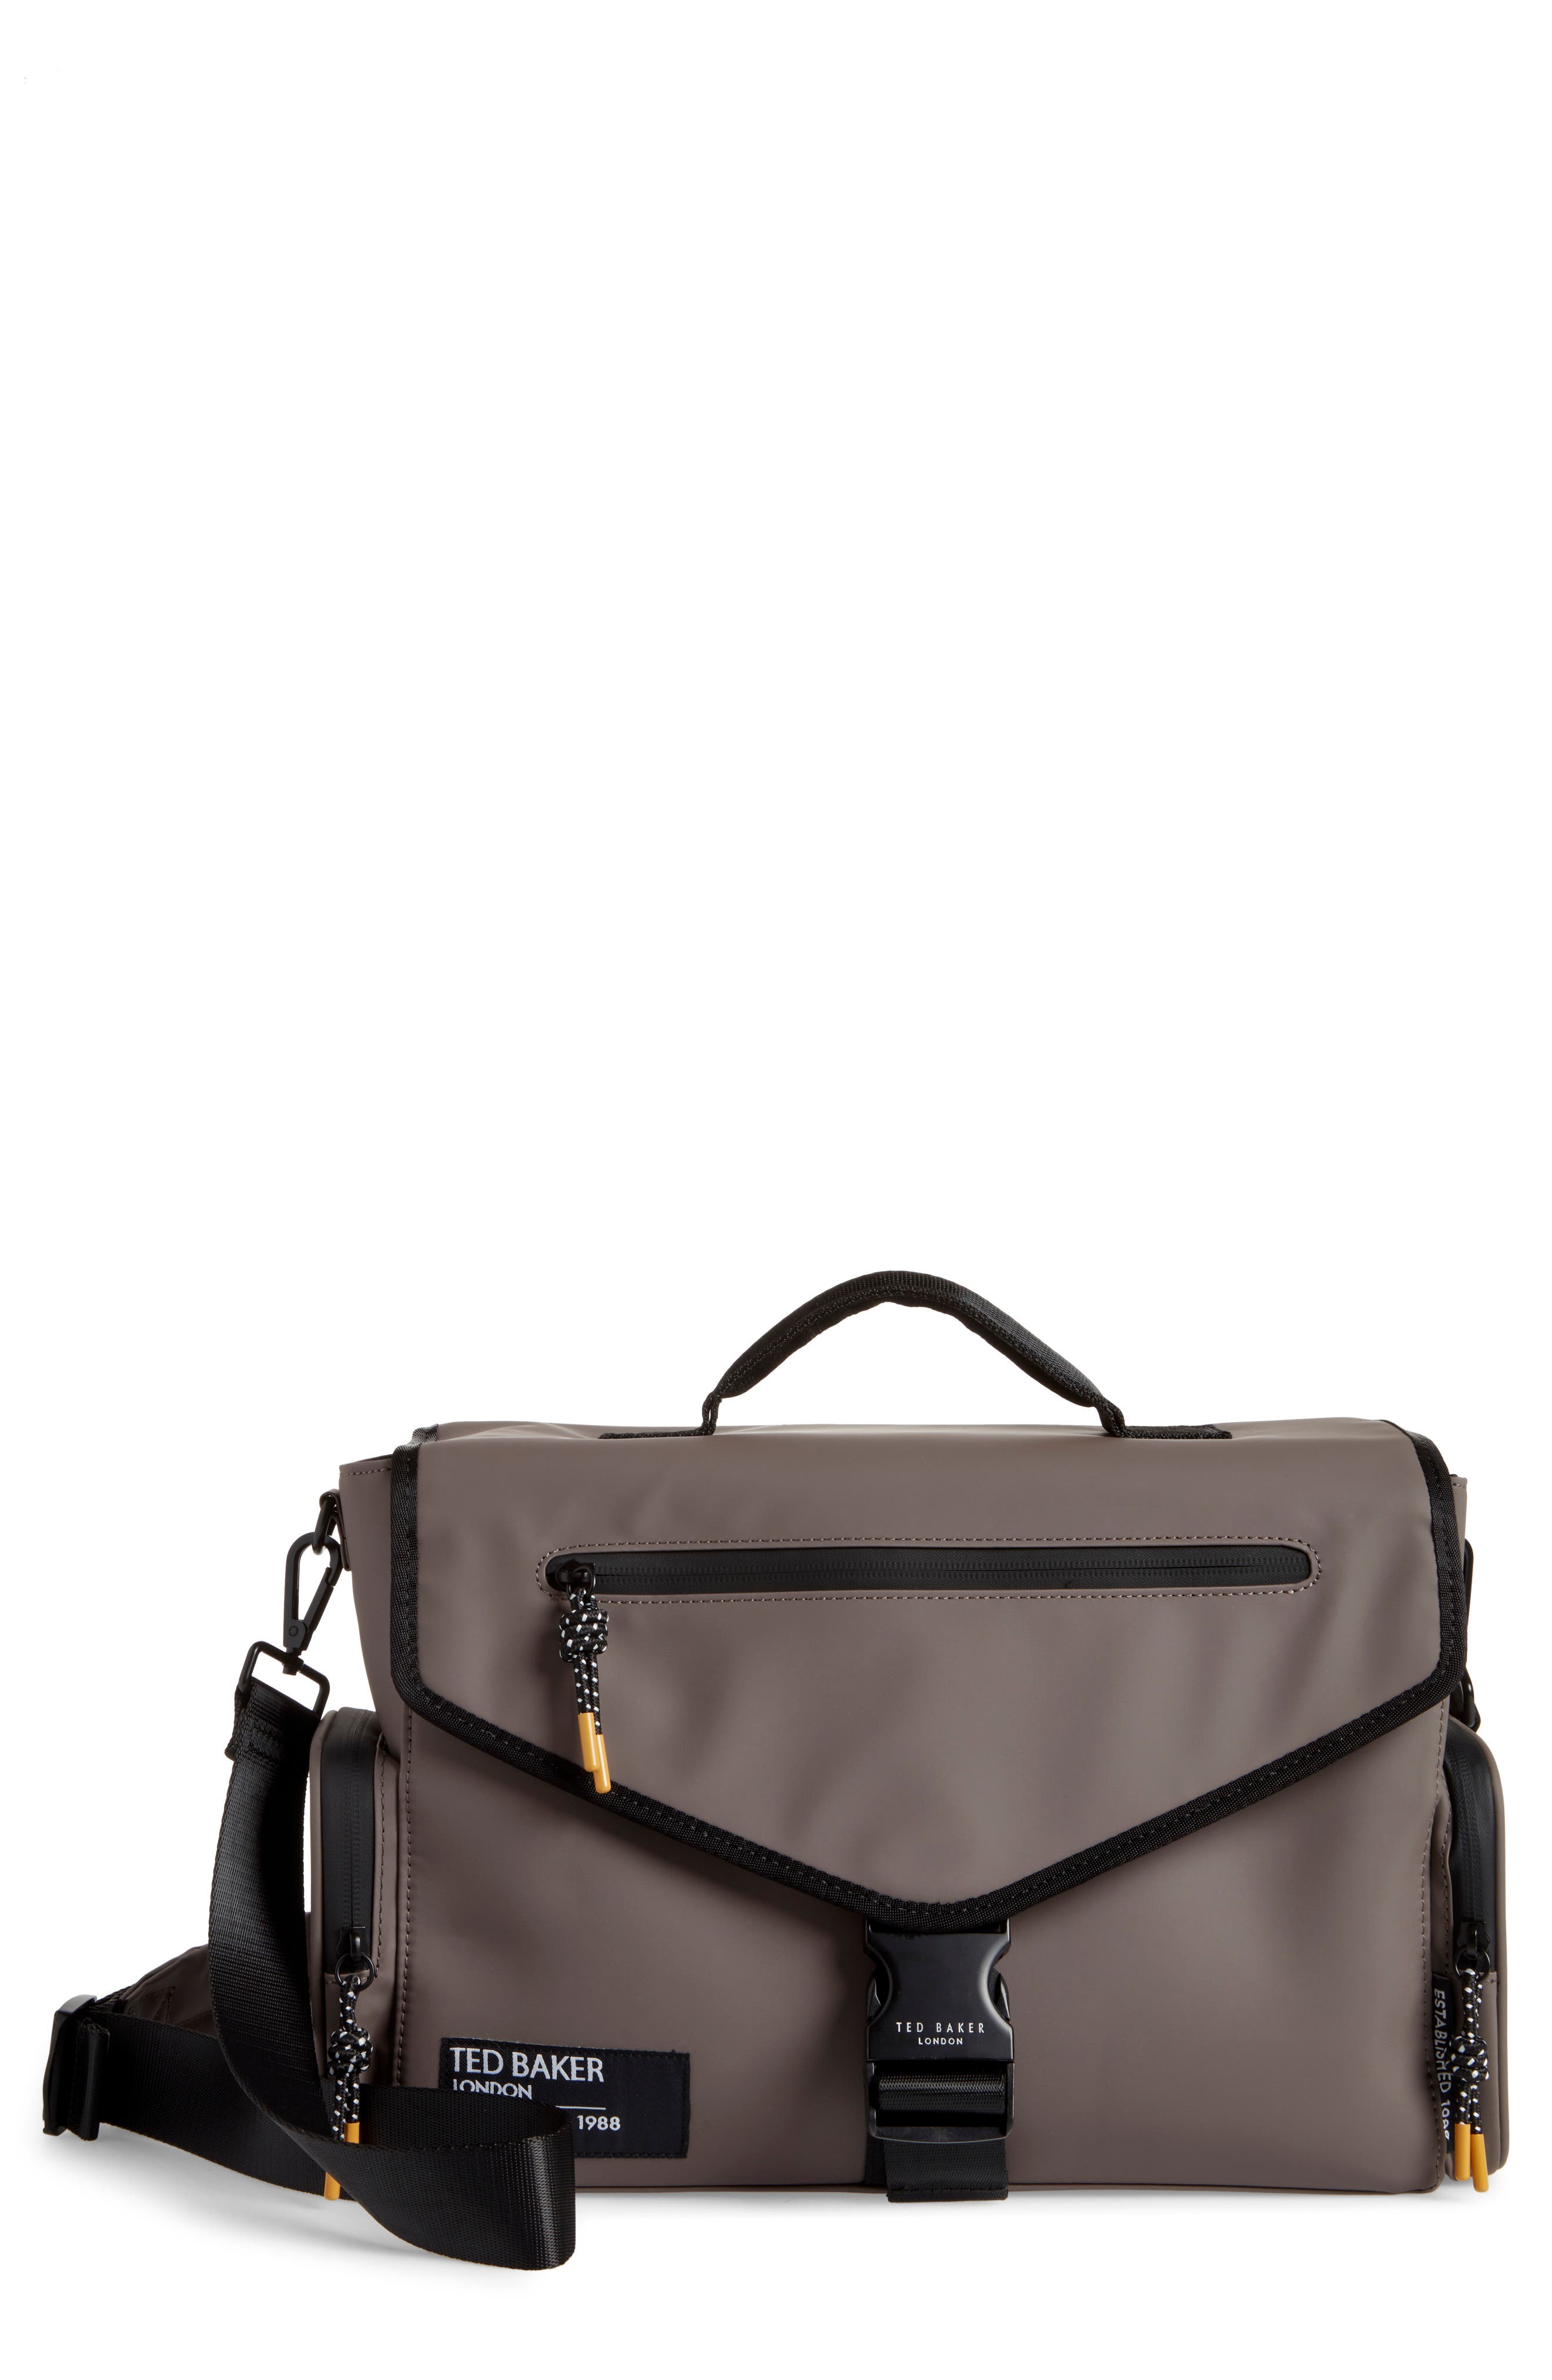 Mens Bags Briefcases and laptop bags Ted Baker Synthetic Rubberised Satchel Bag in Black for Men 